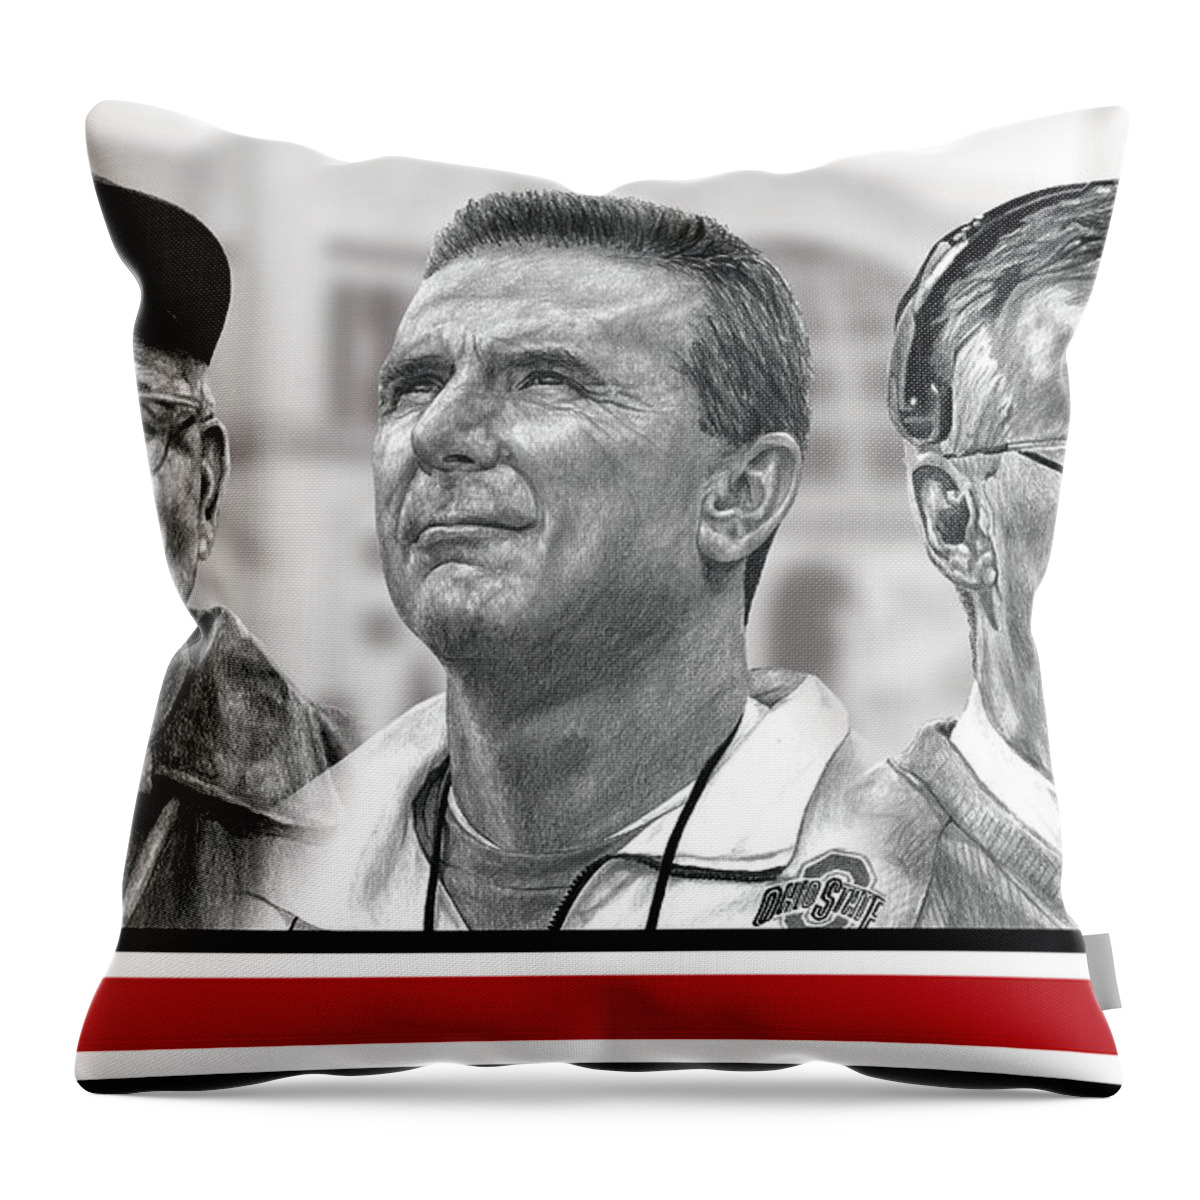 Ohio State Buckeyes Throw Pillow featuring the digital art The Coaches by Bobby Shaw